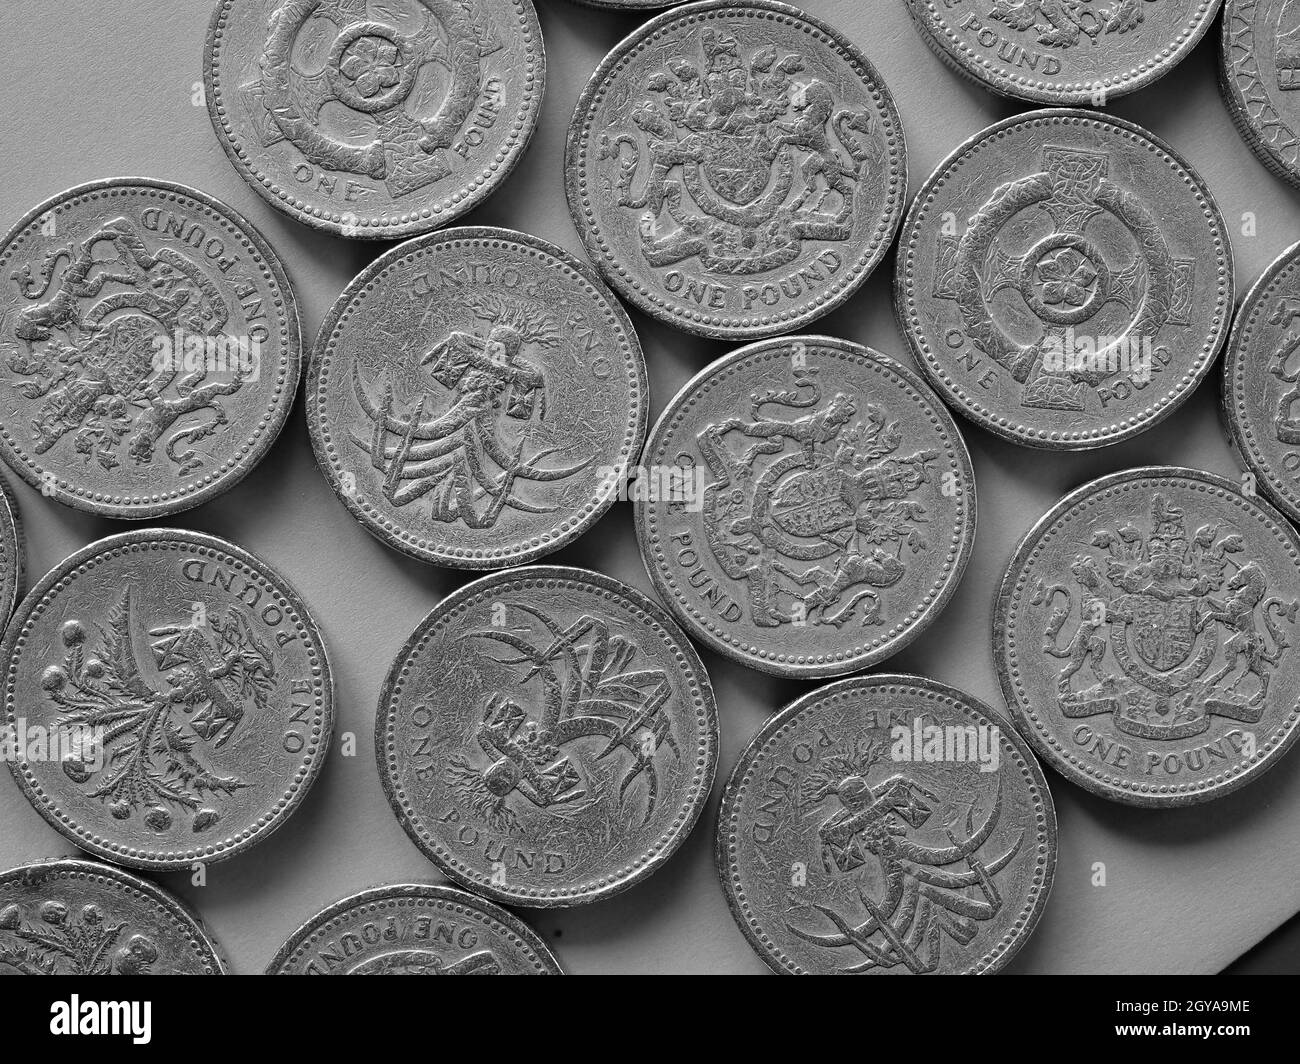 Pound coins money (GBP), currency of United Kingdom - One Pound coin in black and white Stock Photo